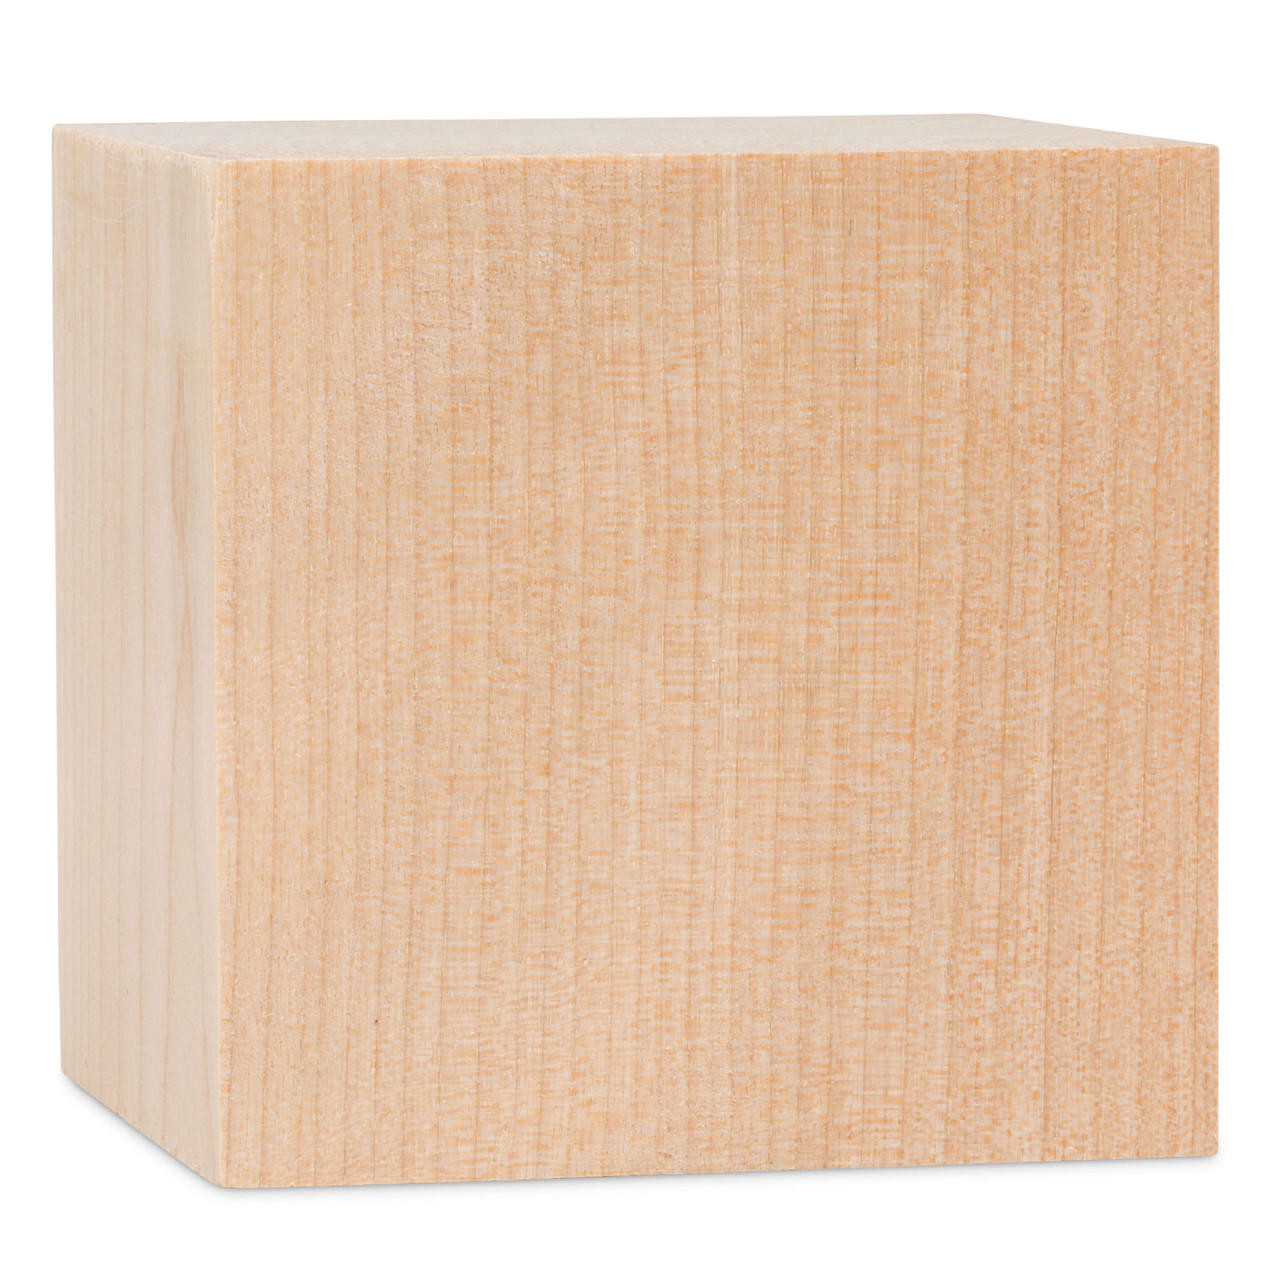 4 Large Wood Cubes, Pack of 3 Square Wood Block for DIY, Wooden Blocks for  Crafts and Decor, by Woodpeckers